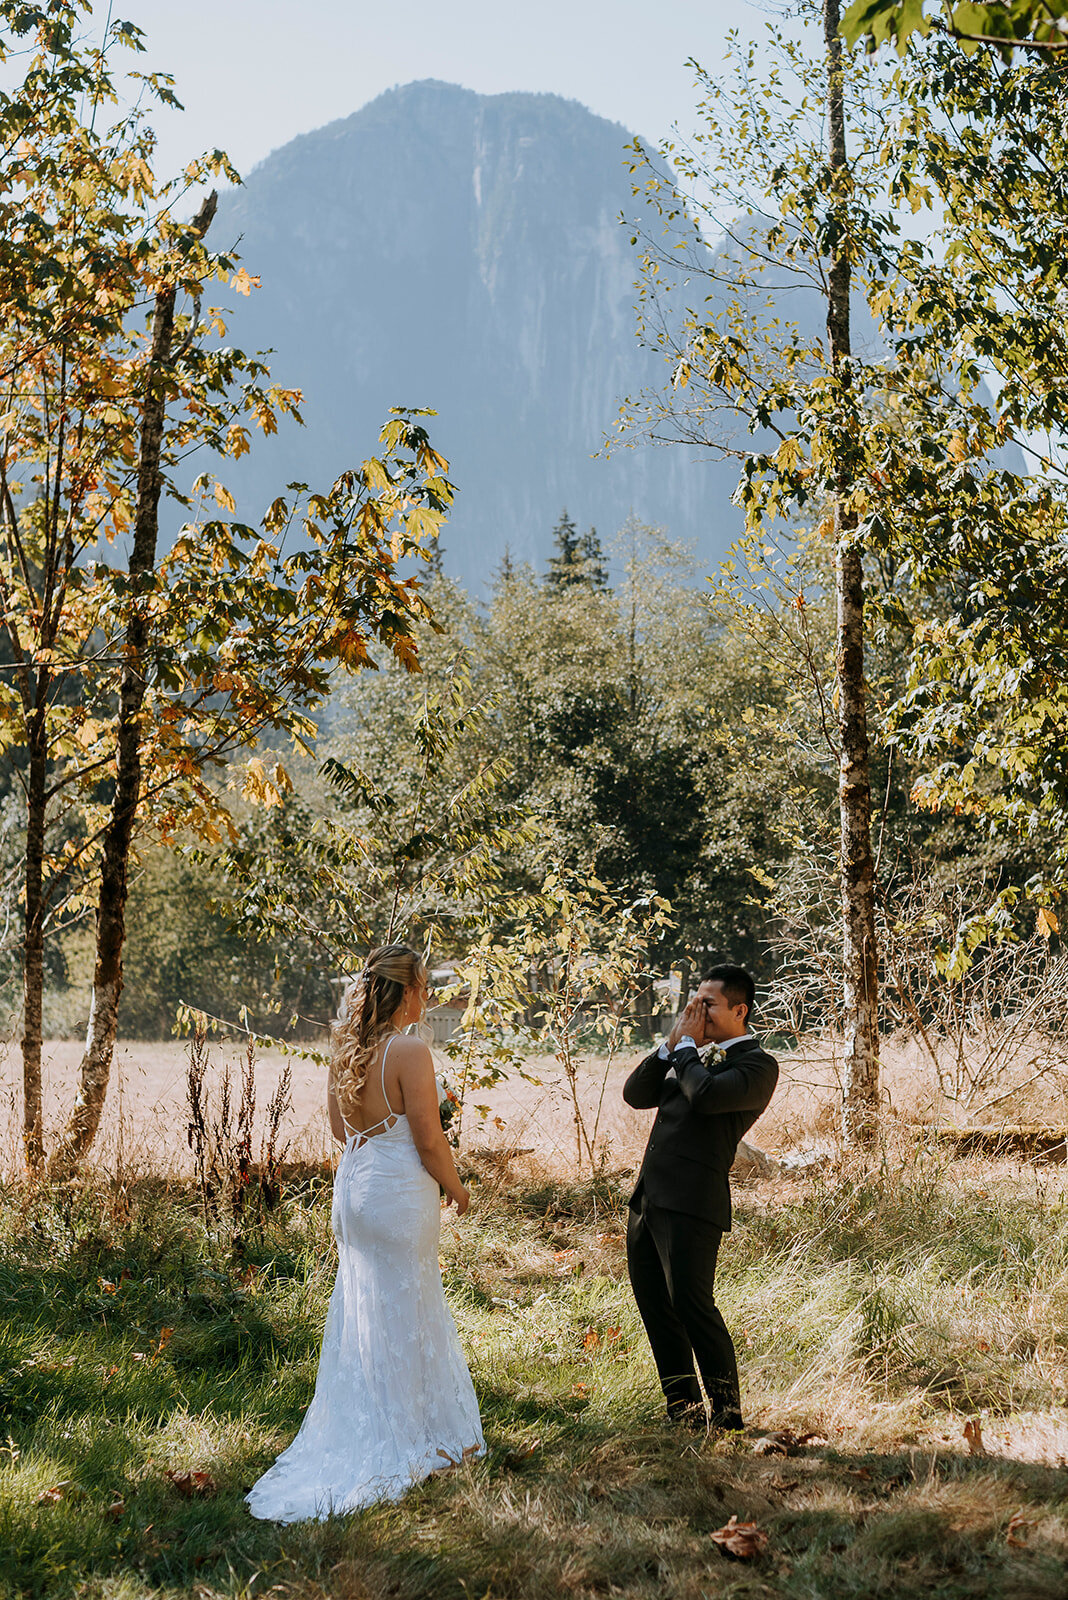 Squamish couple shares first look before their backyard wedding ceremony in the shadow of the Squamish Cheif